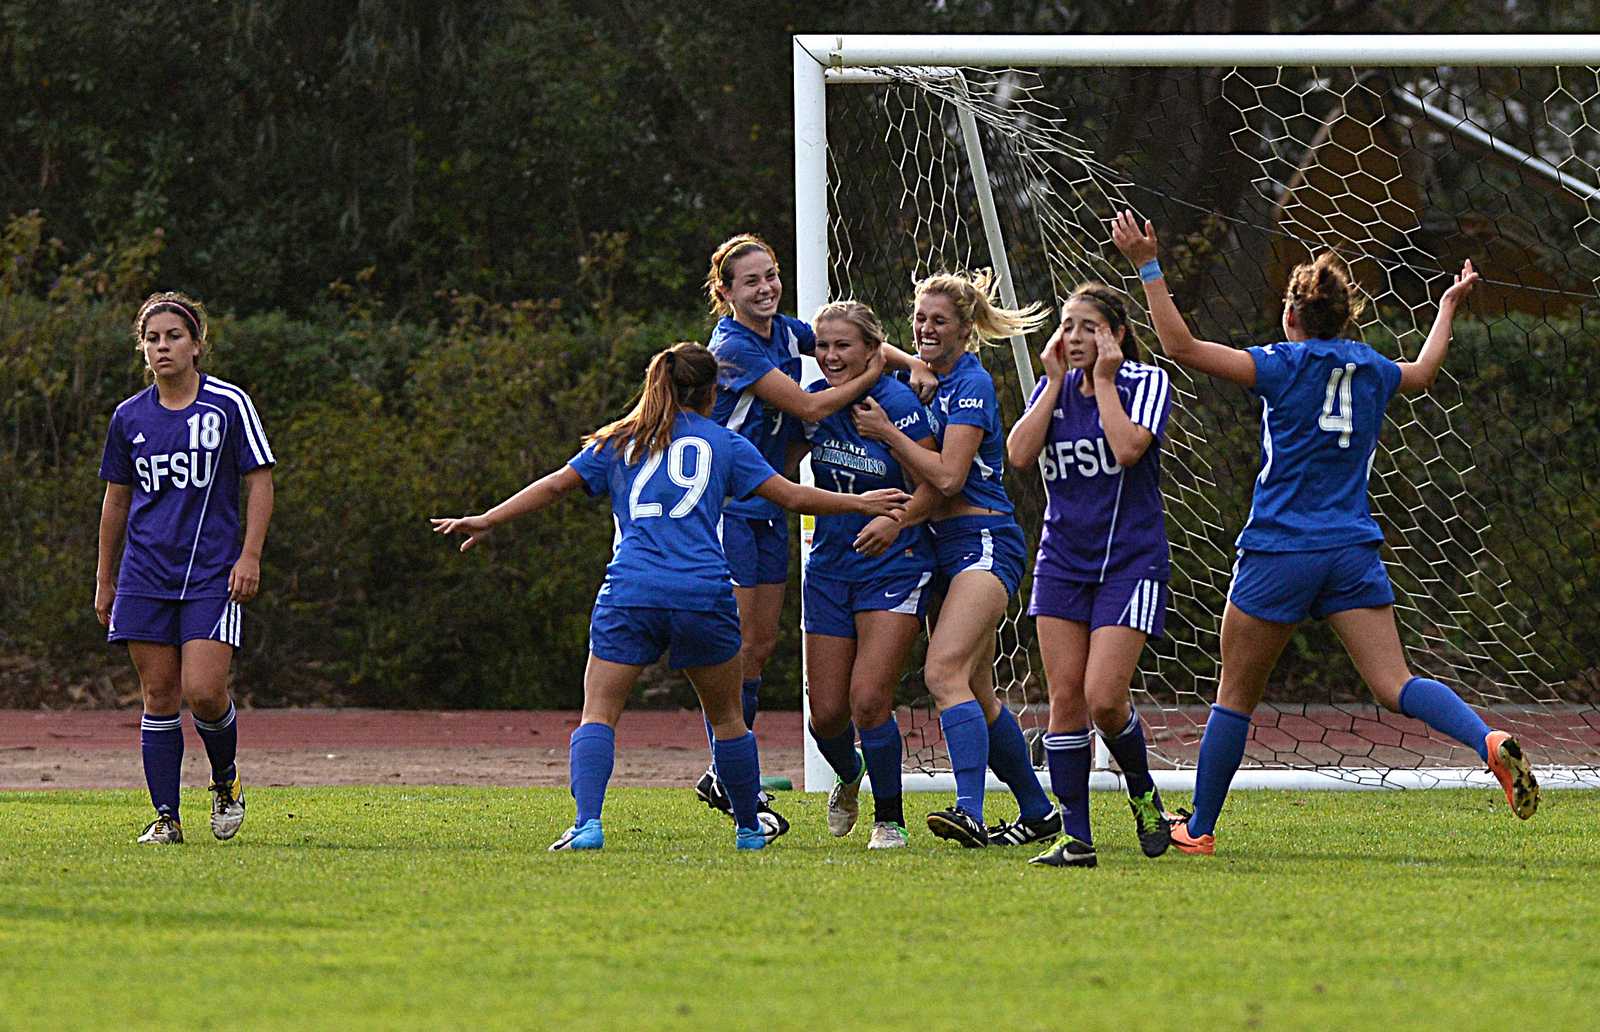 Cal State San Bernardino's Coyotes score the last goal against SF State Gators' during the soccer match at Cox Stadium in San Francisco on Sunday, Nov. 3, 2013. The Gators lost 2-0. Photo by Virginia Tieman / Xpress